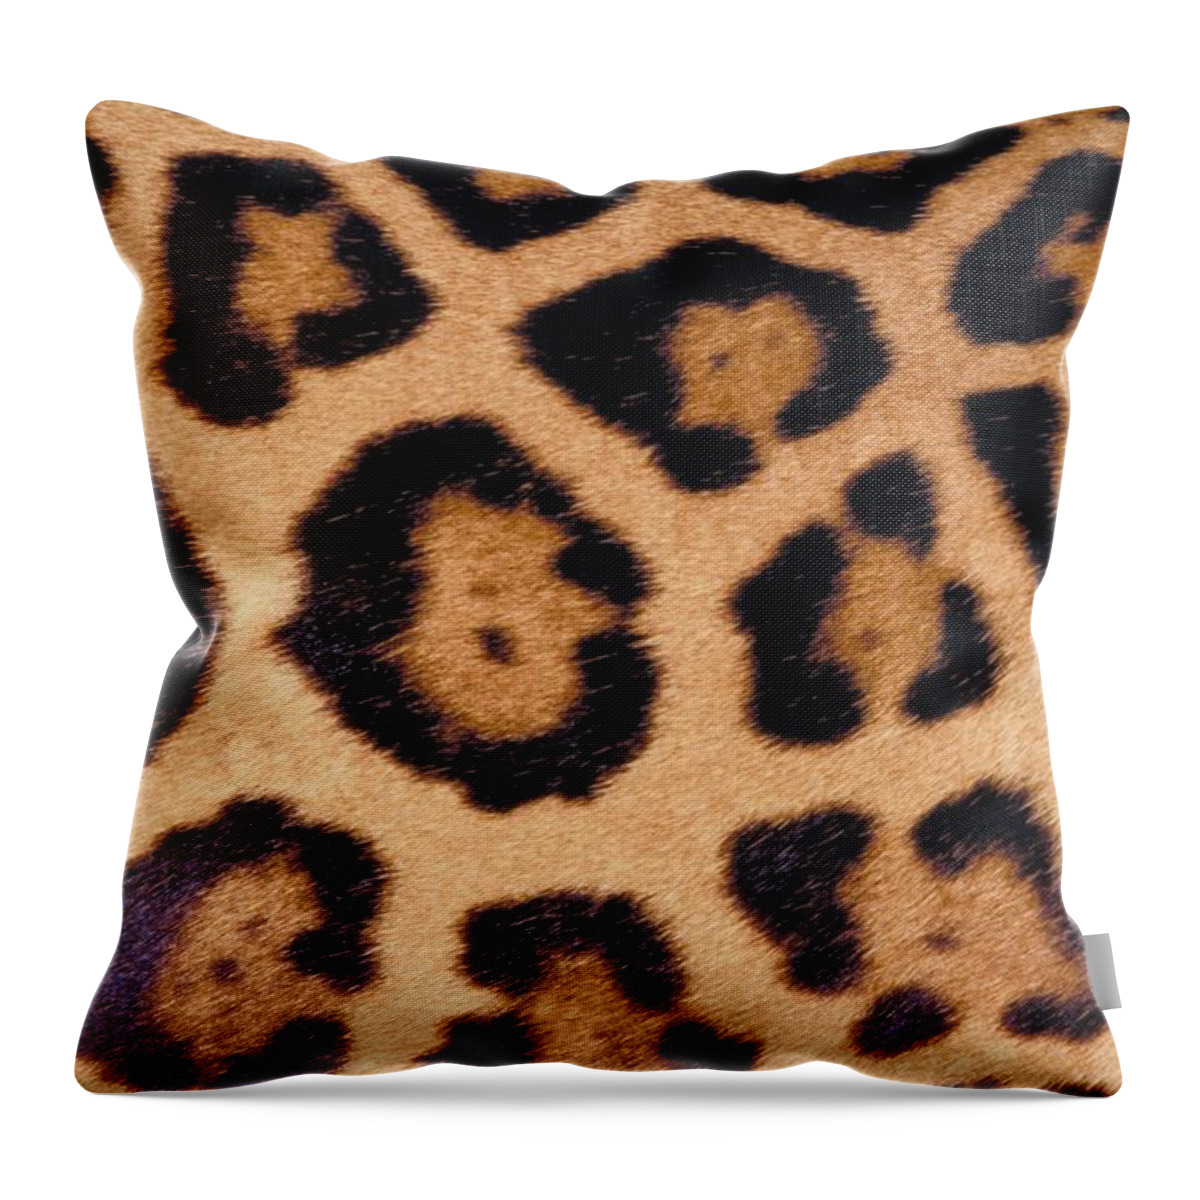 Animal Skin Throw Pillow featuring the photograph 23899700 by Jupiterimages